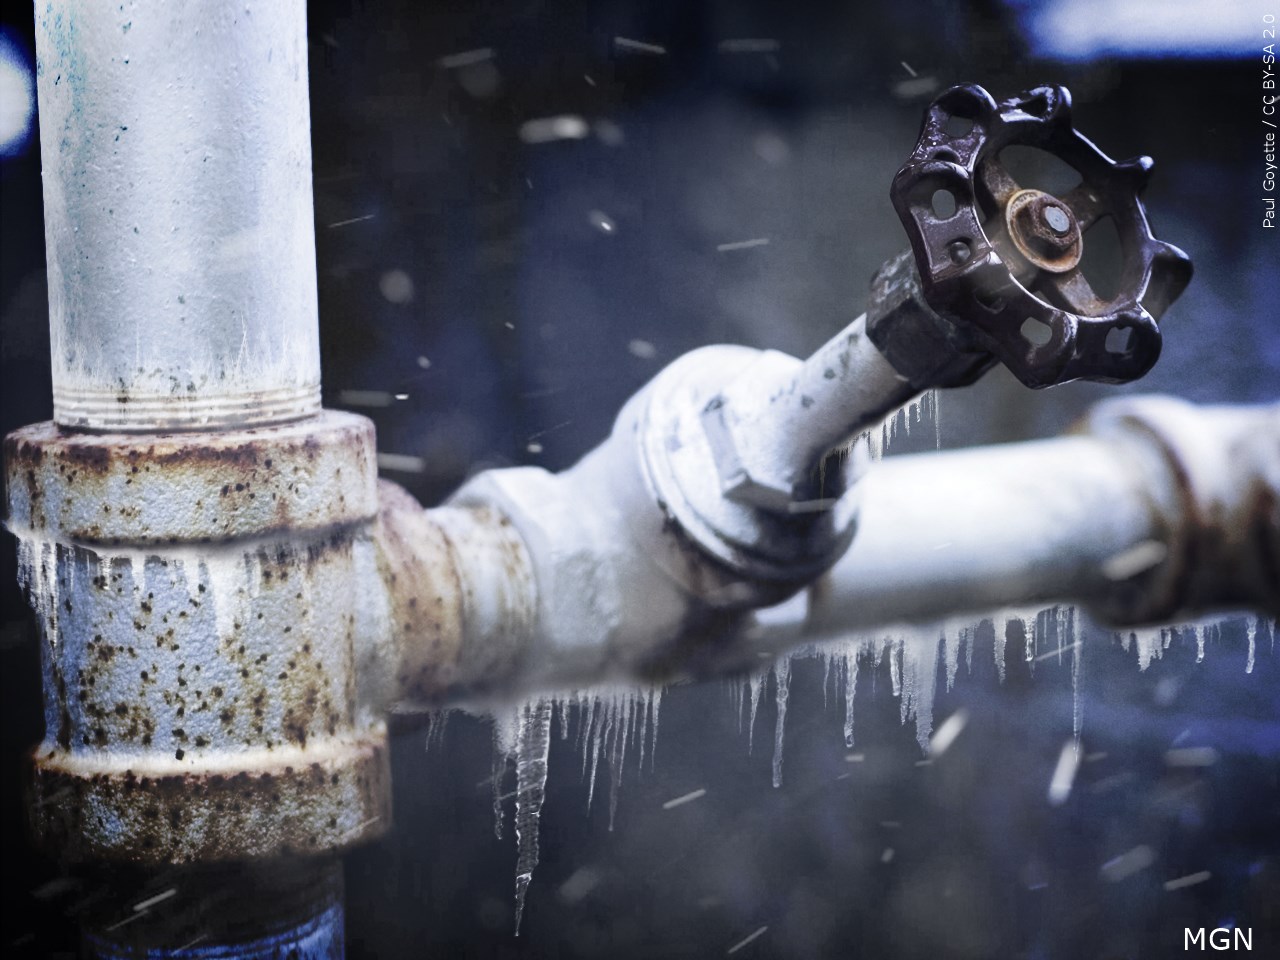 Aqua PA offers tips to keep pipes from freezing - Glenside Local